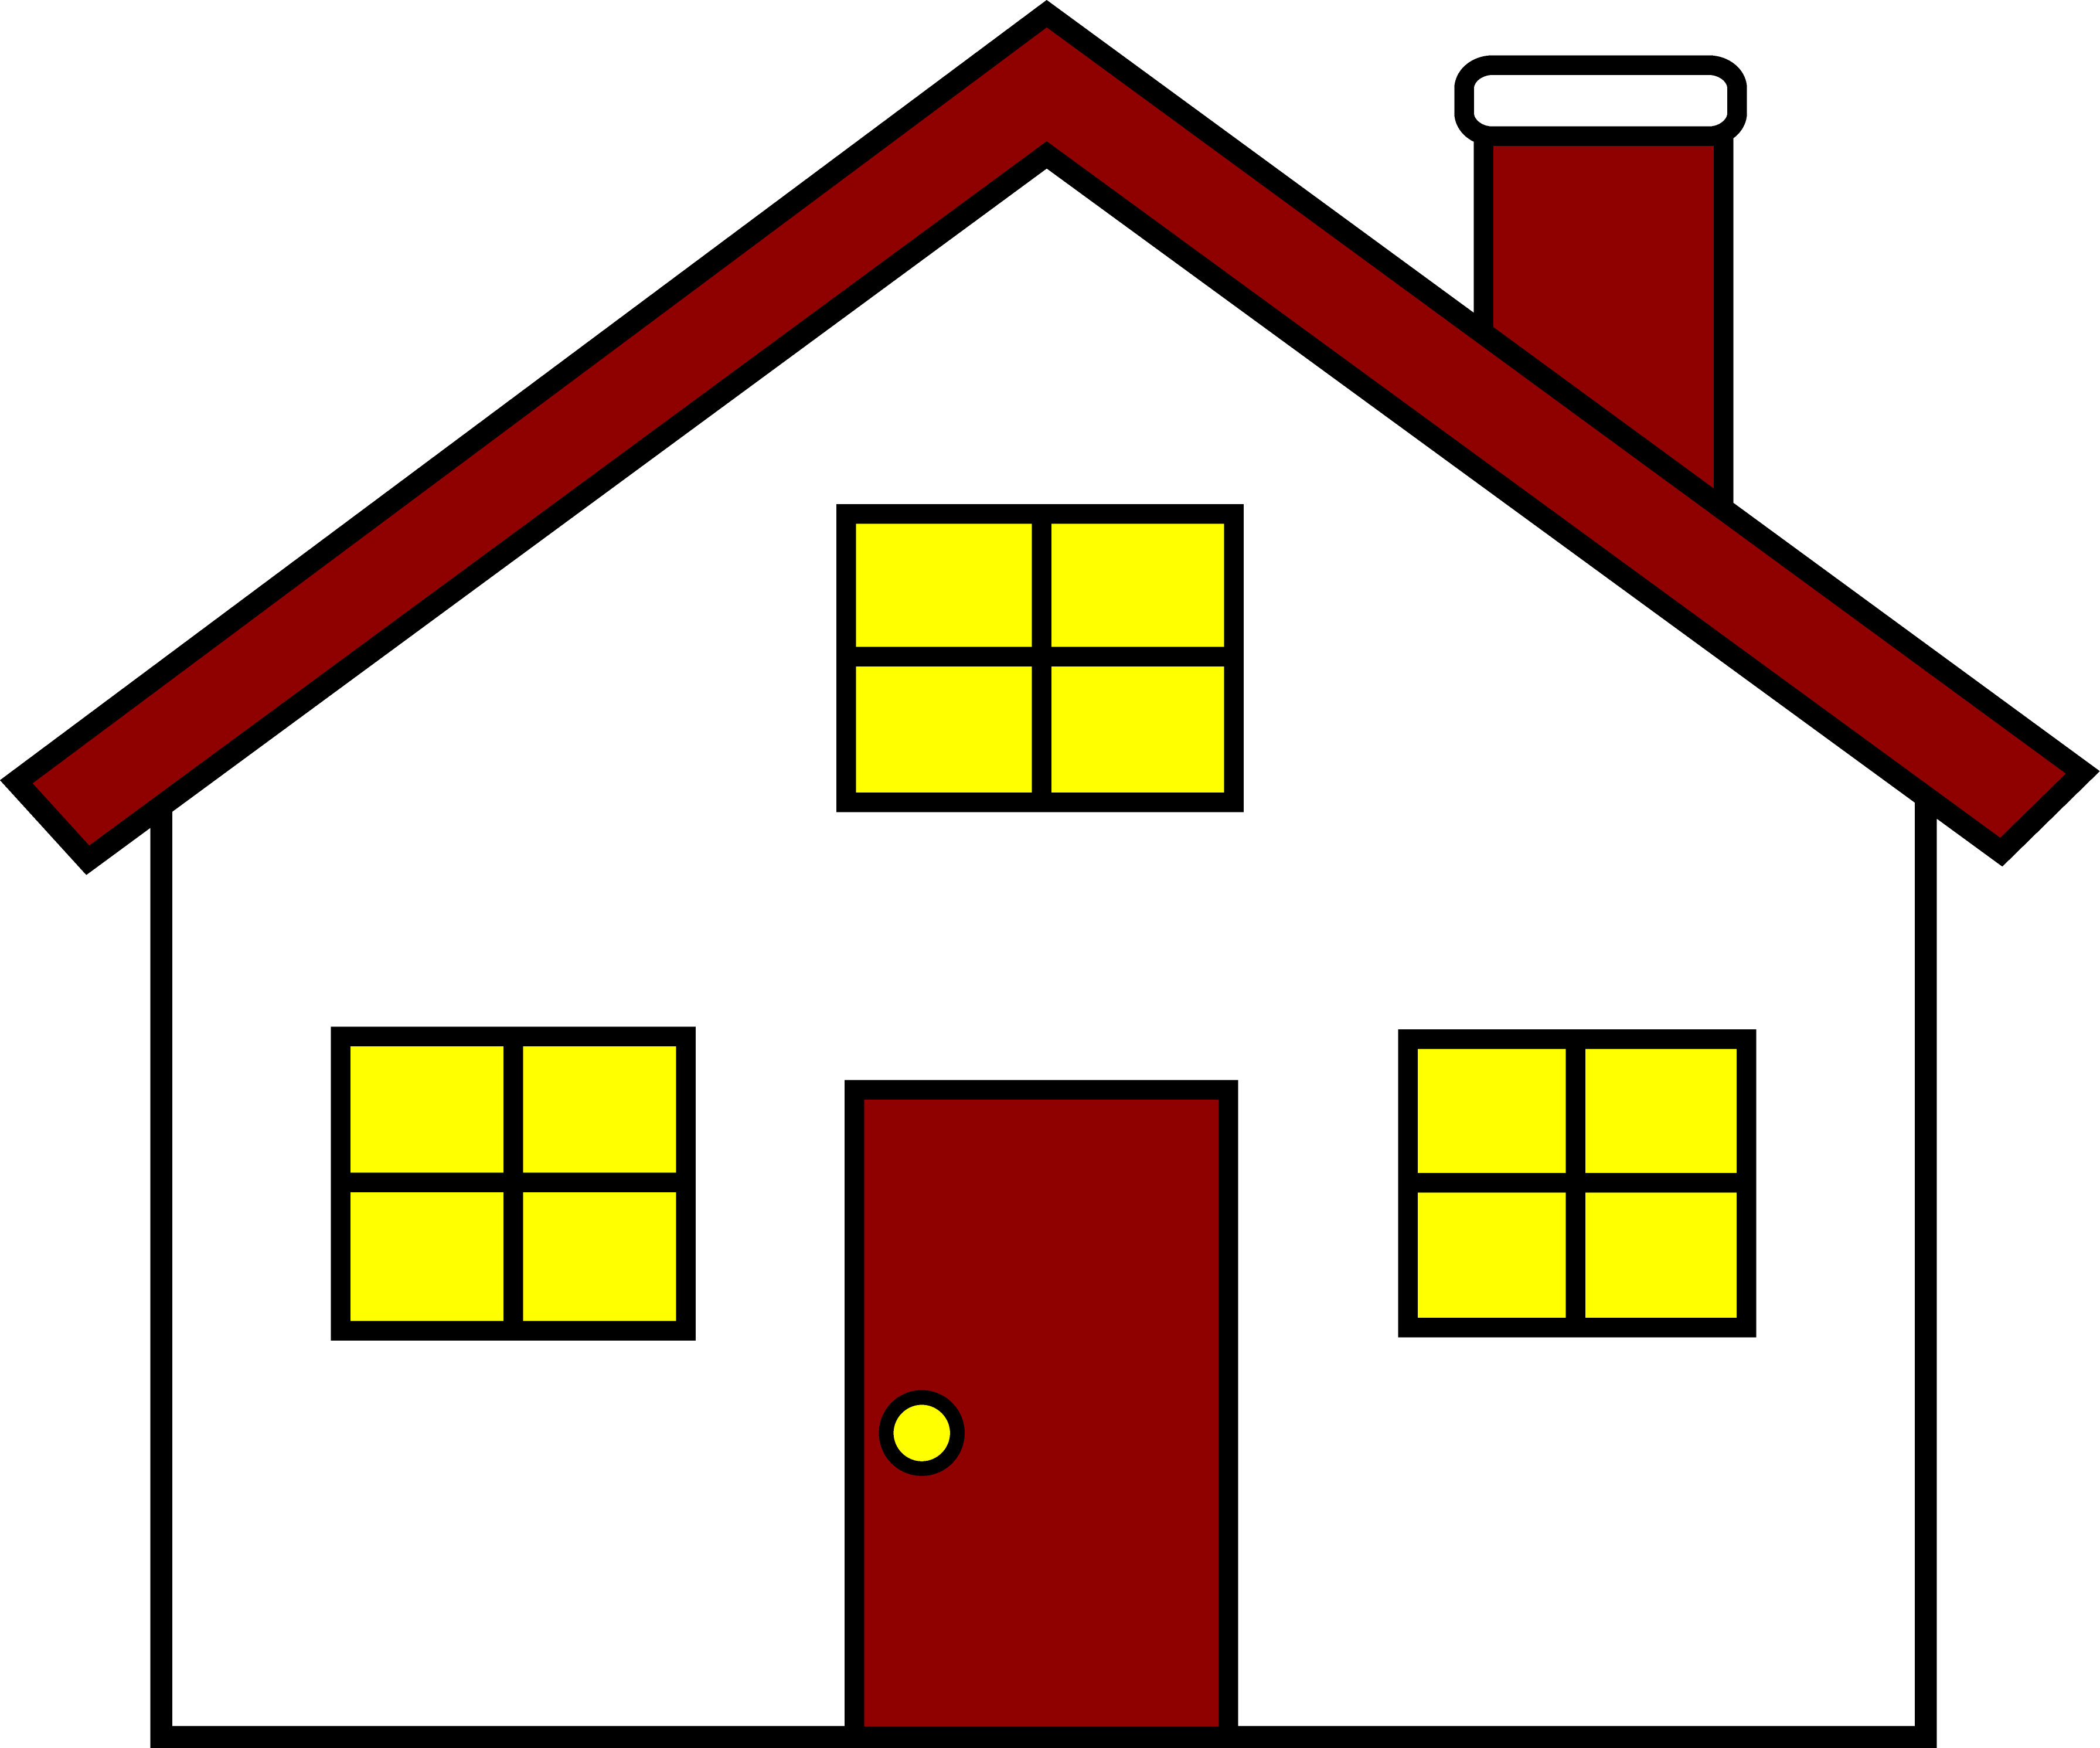 Cute House Drawing   Clipart Panda   Free Clipart Images